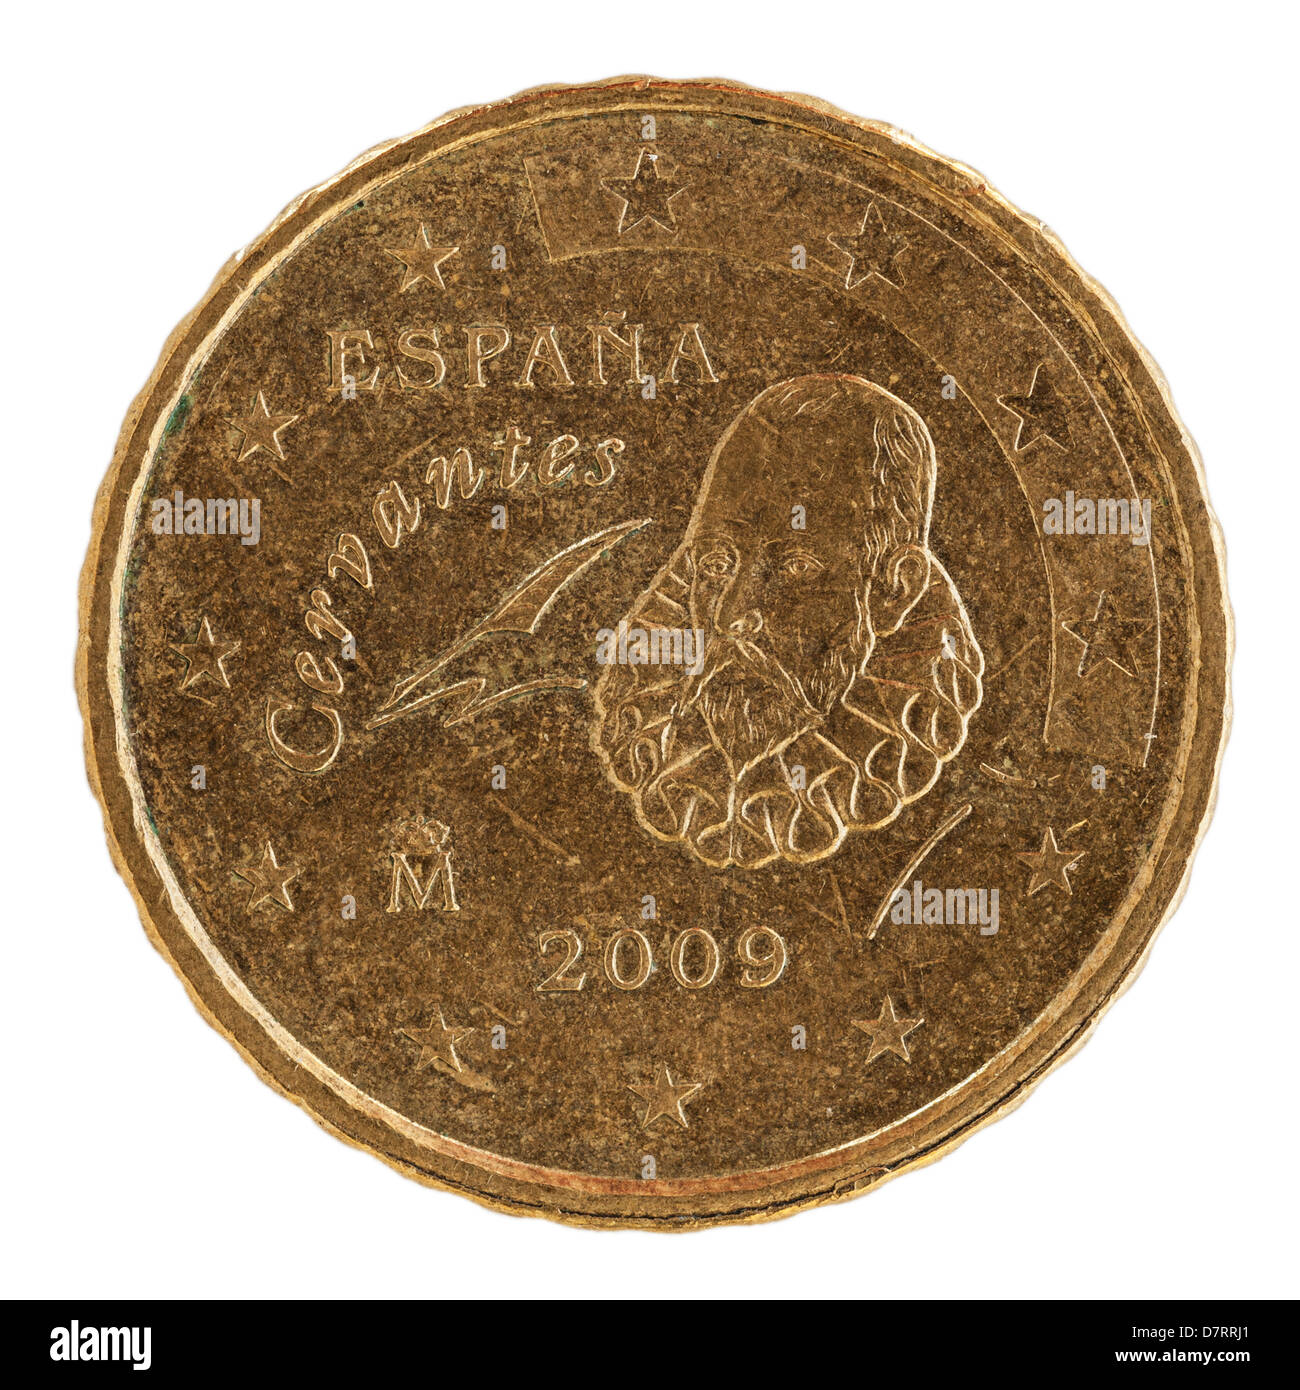 A Spanish euro 10 cent coin on a white background Stock Photo